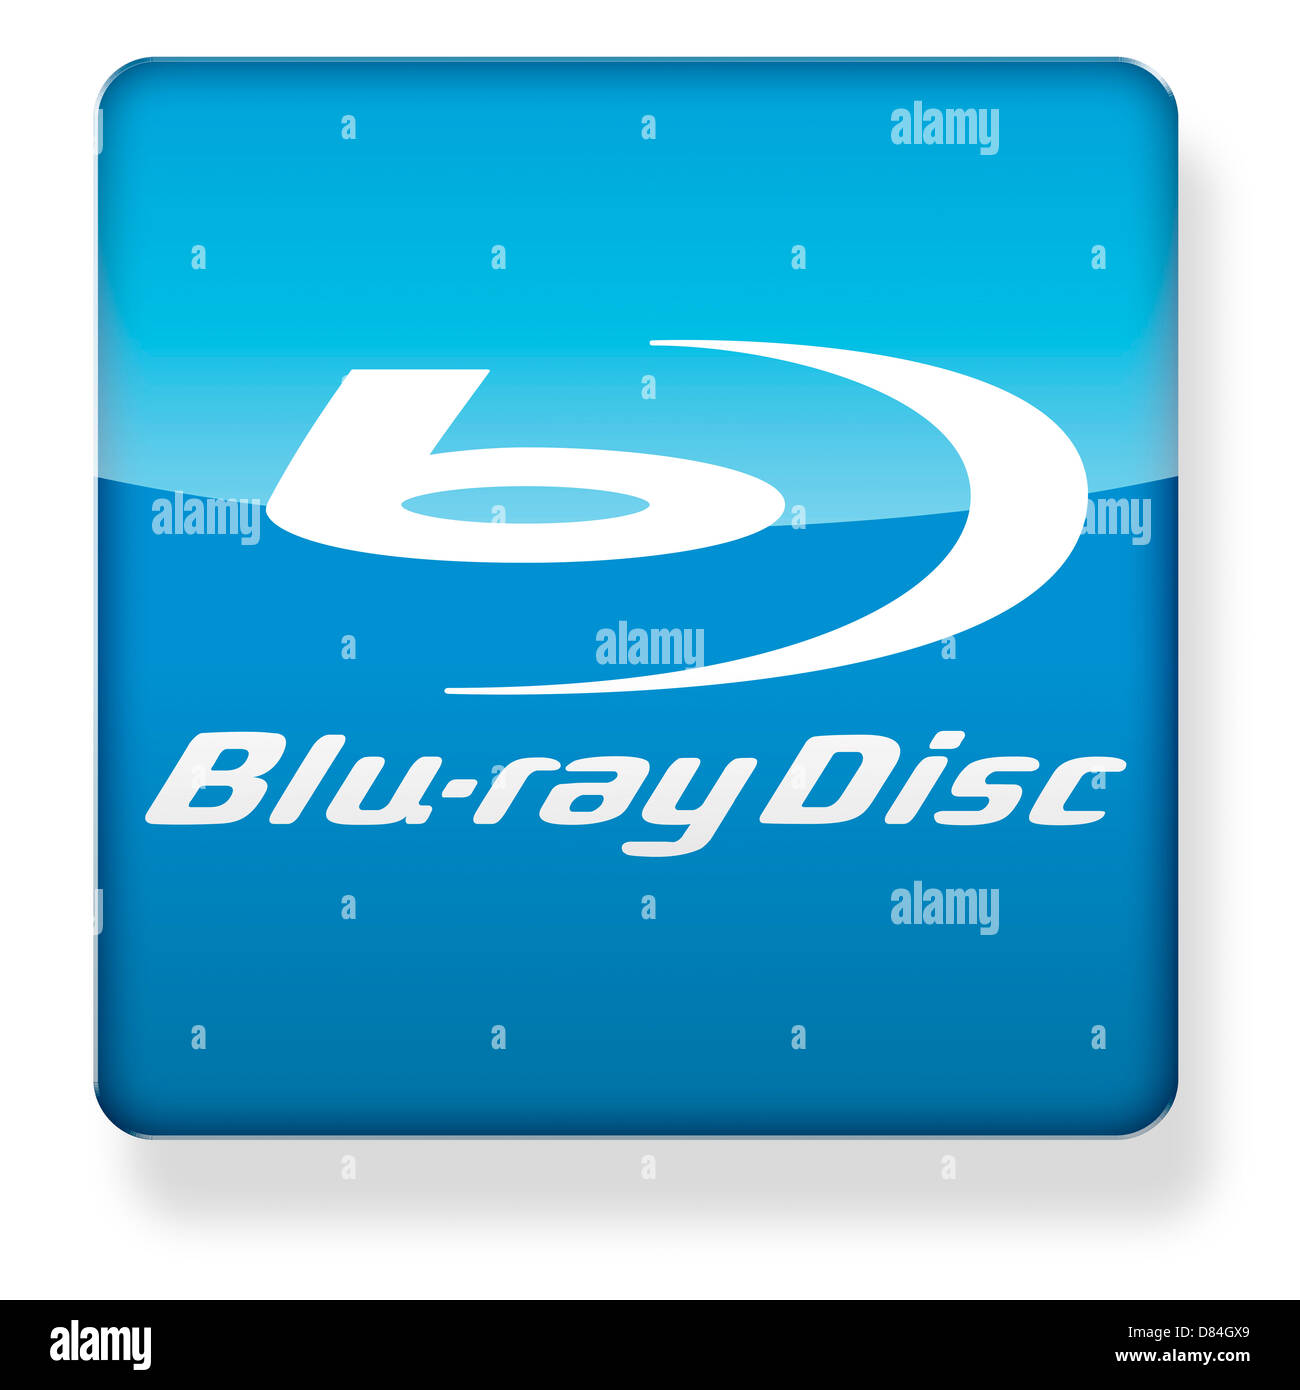 Blu Ray Disc Logo As An App Icon Clipping Path Included Stock